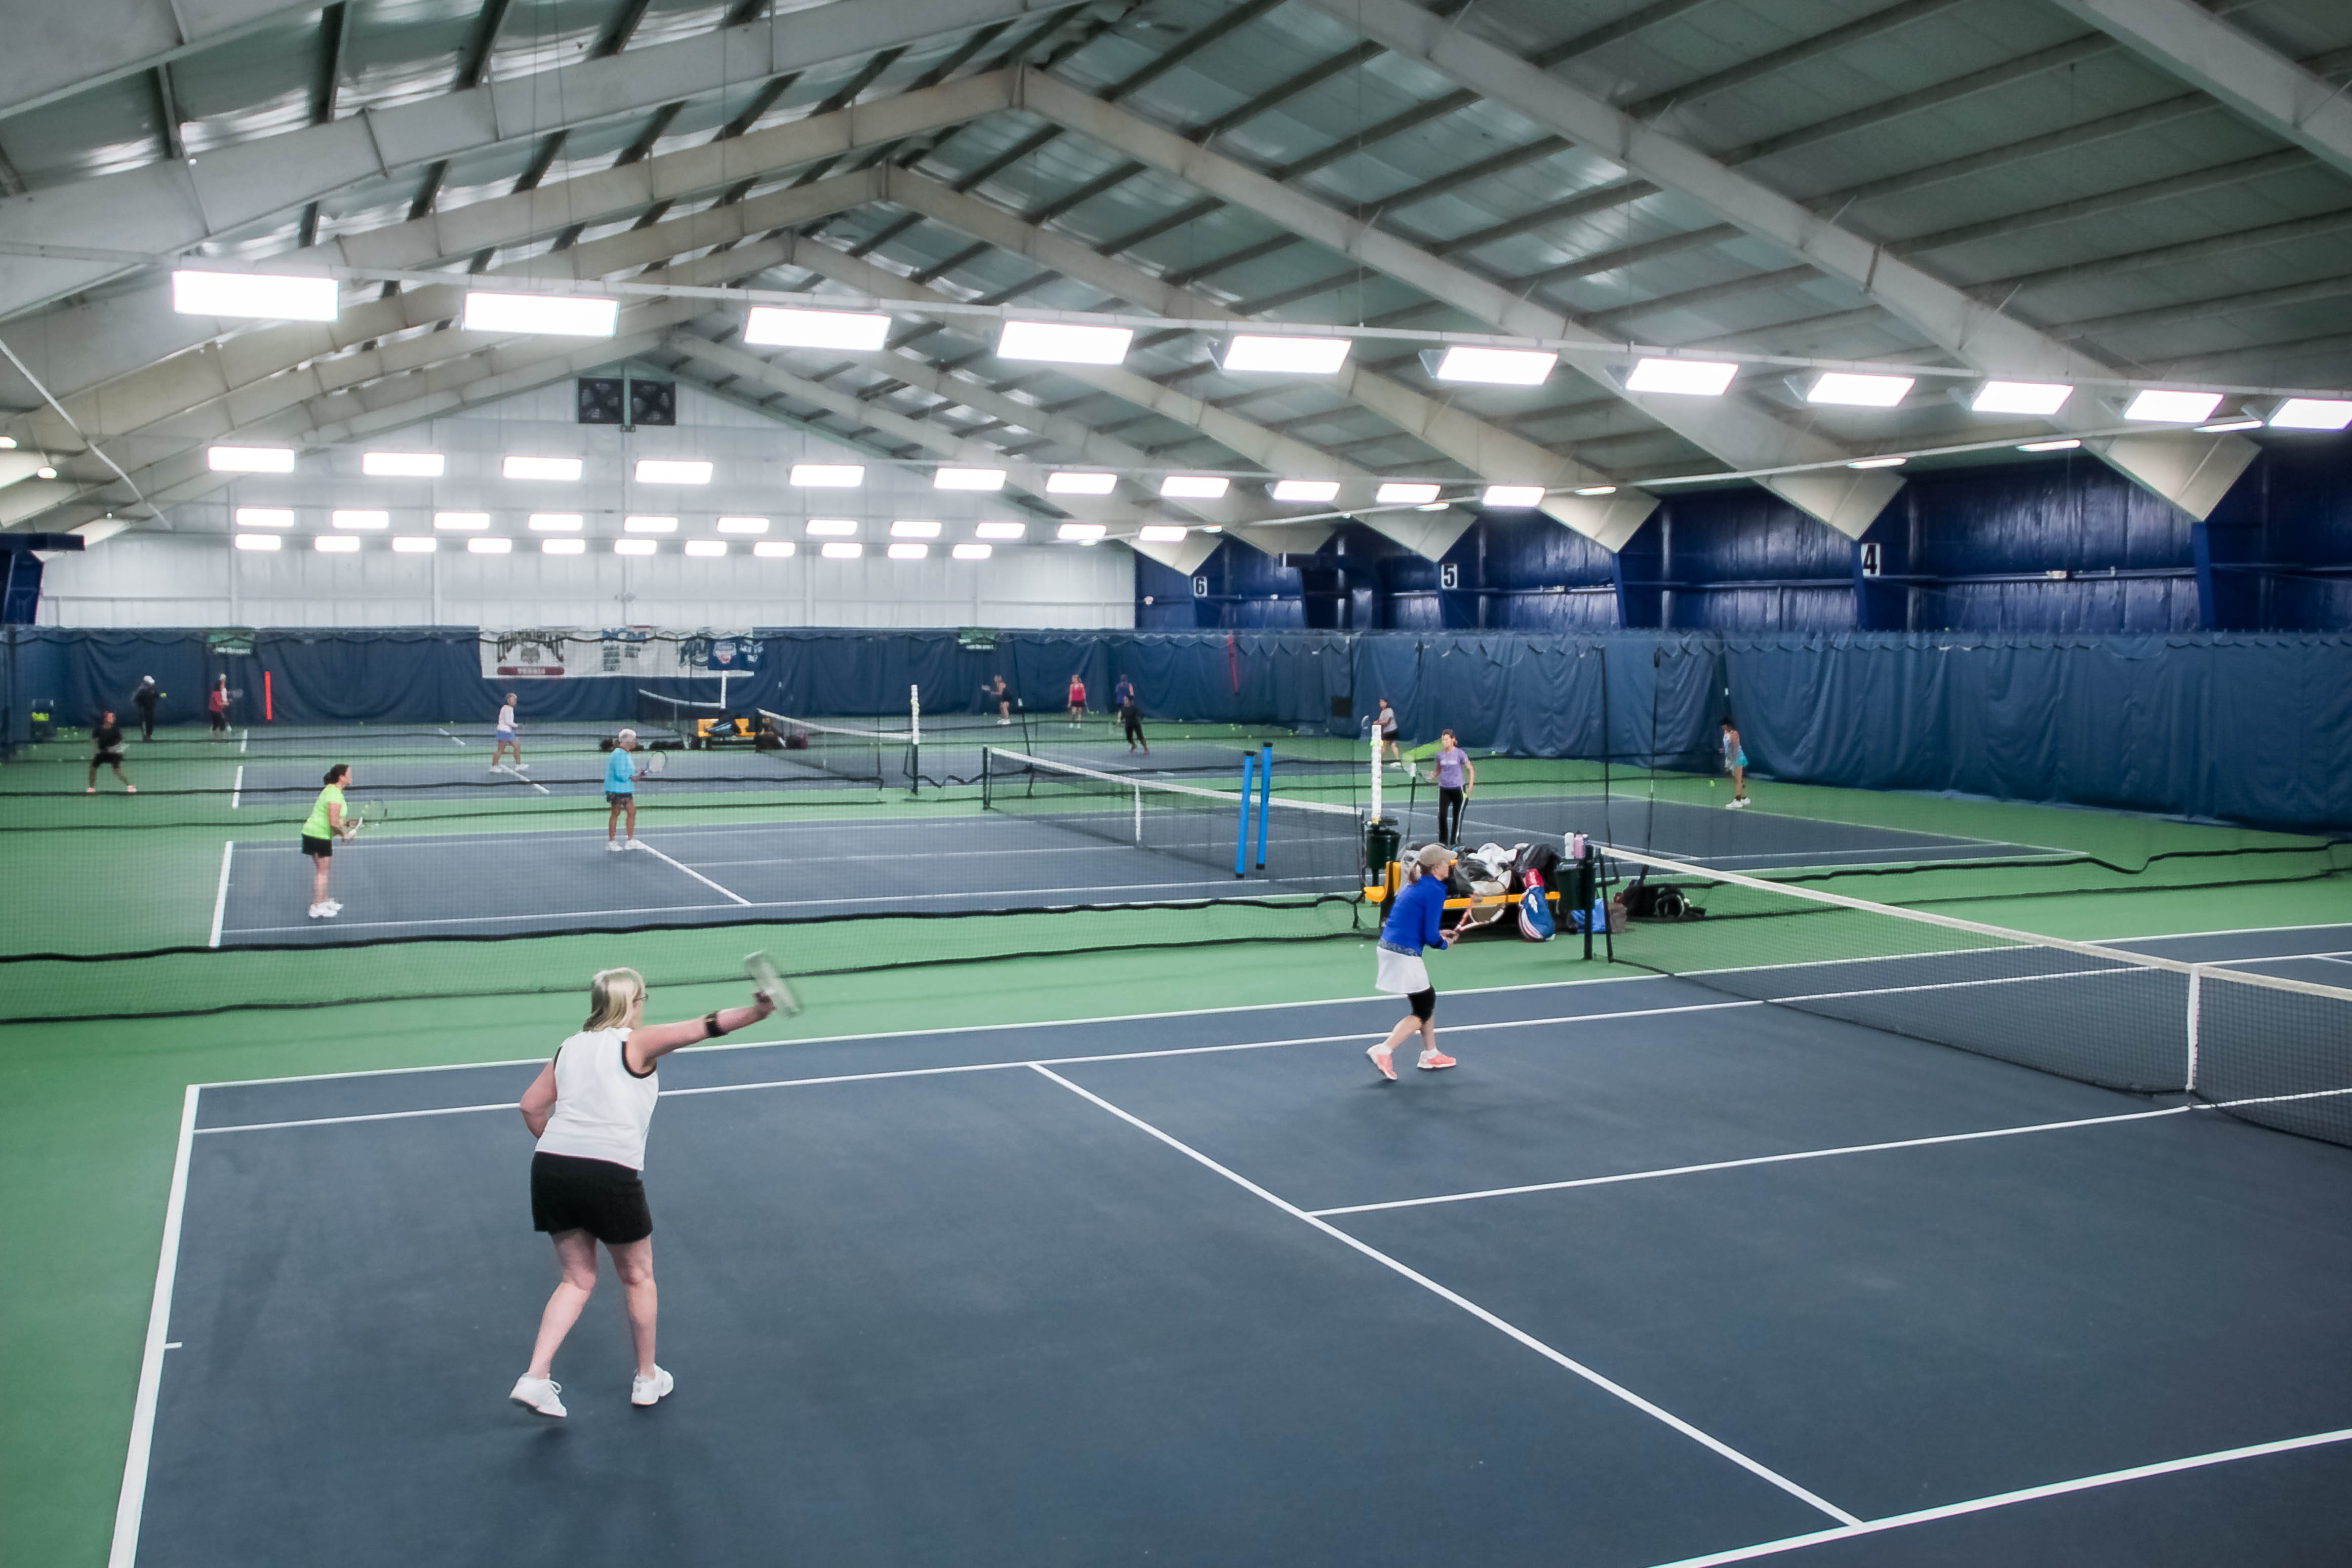 indoor tennis courts Cheaper Than Retail Price Buy Clothing